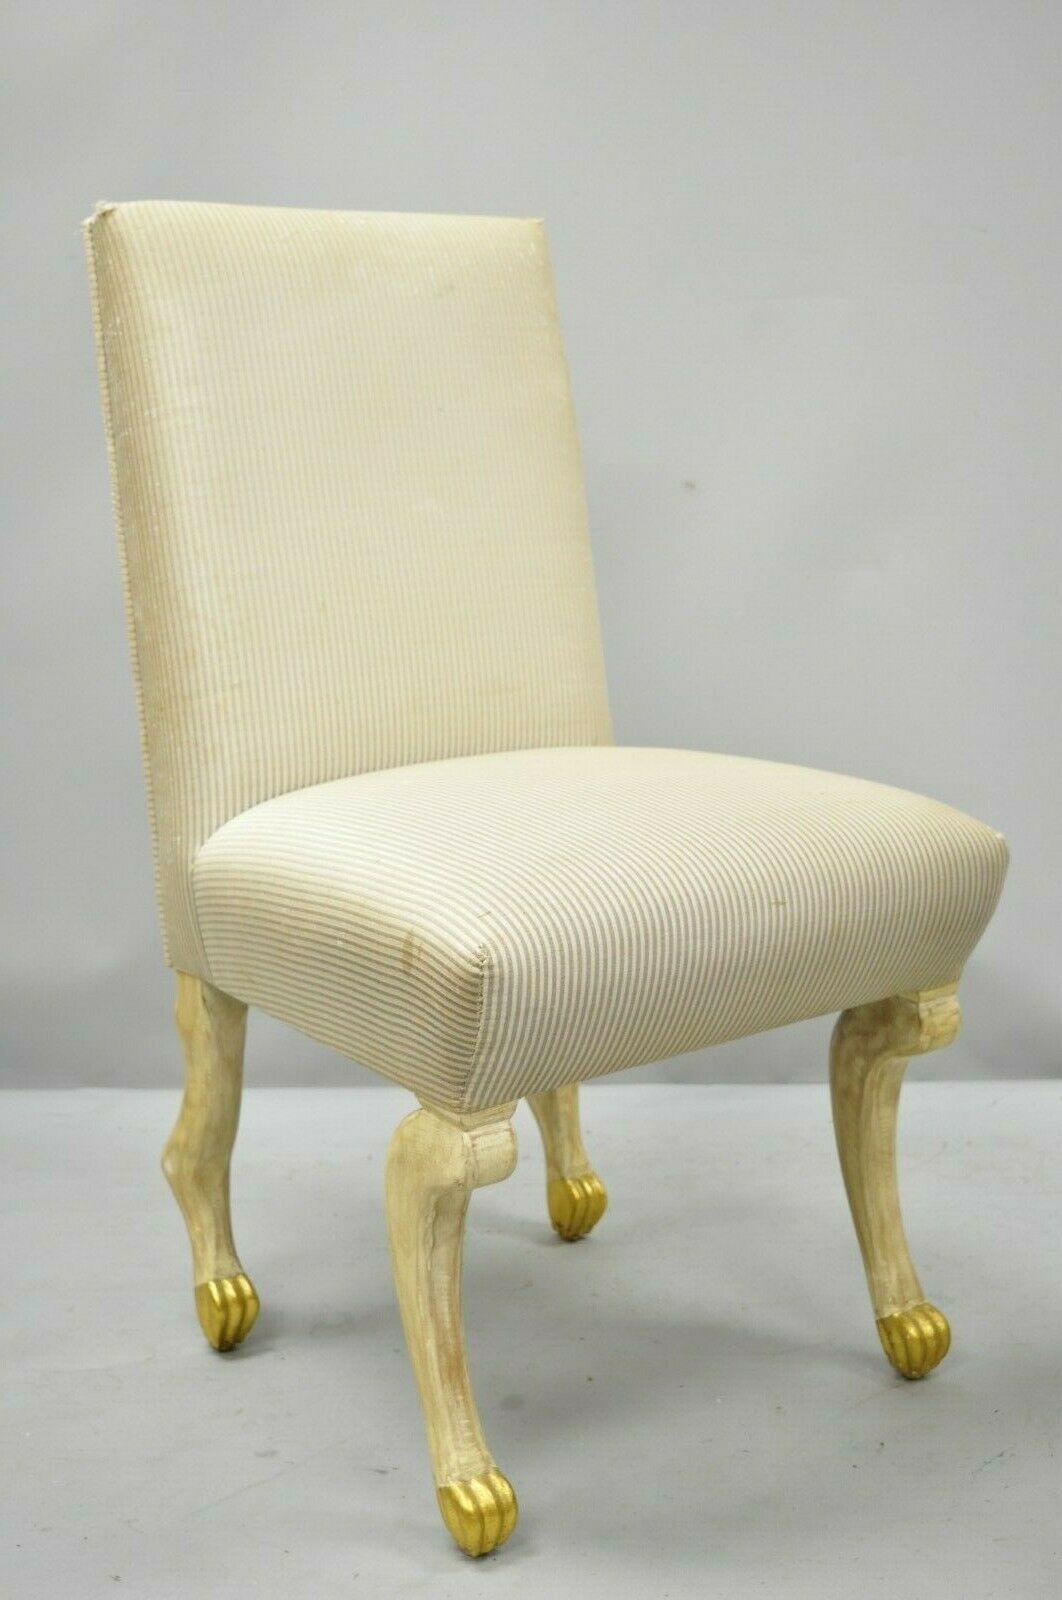 8 Hoof Paw Foot Regency Dining Chairs After the Etruscan Chair by John Dickinson 3